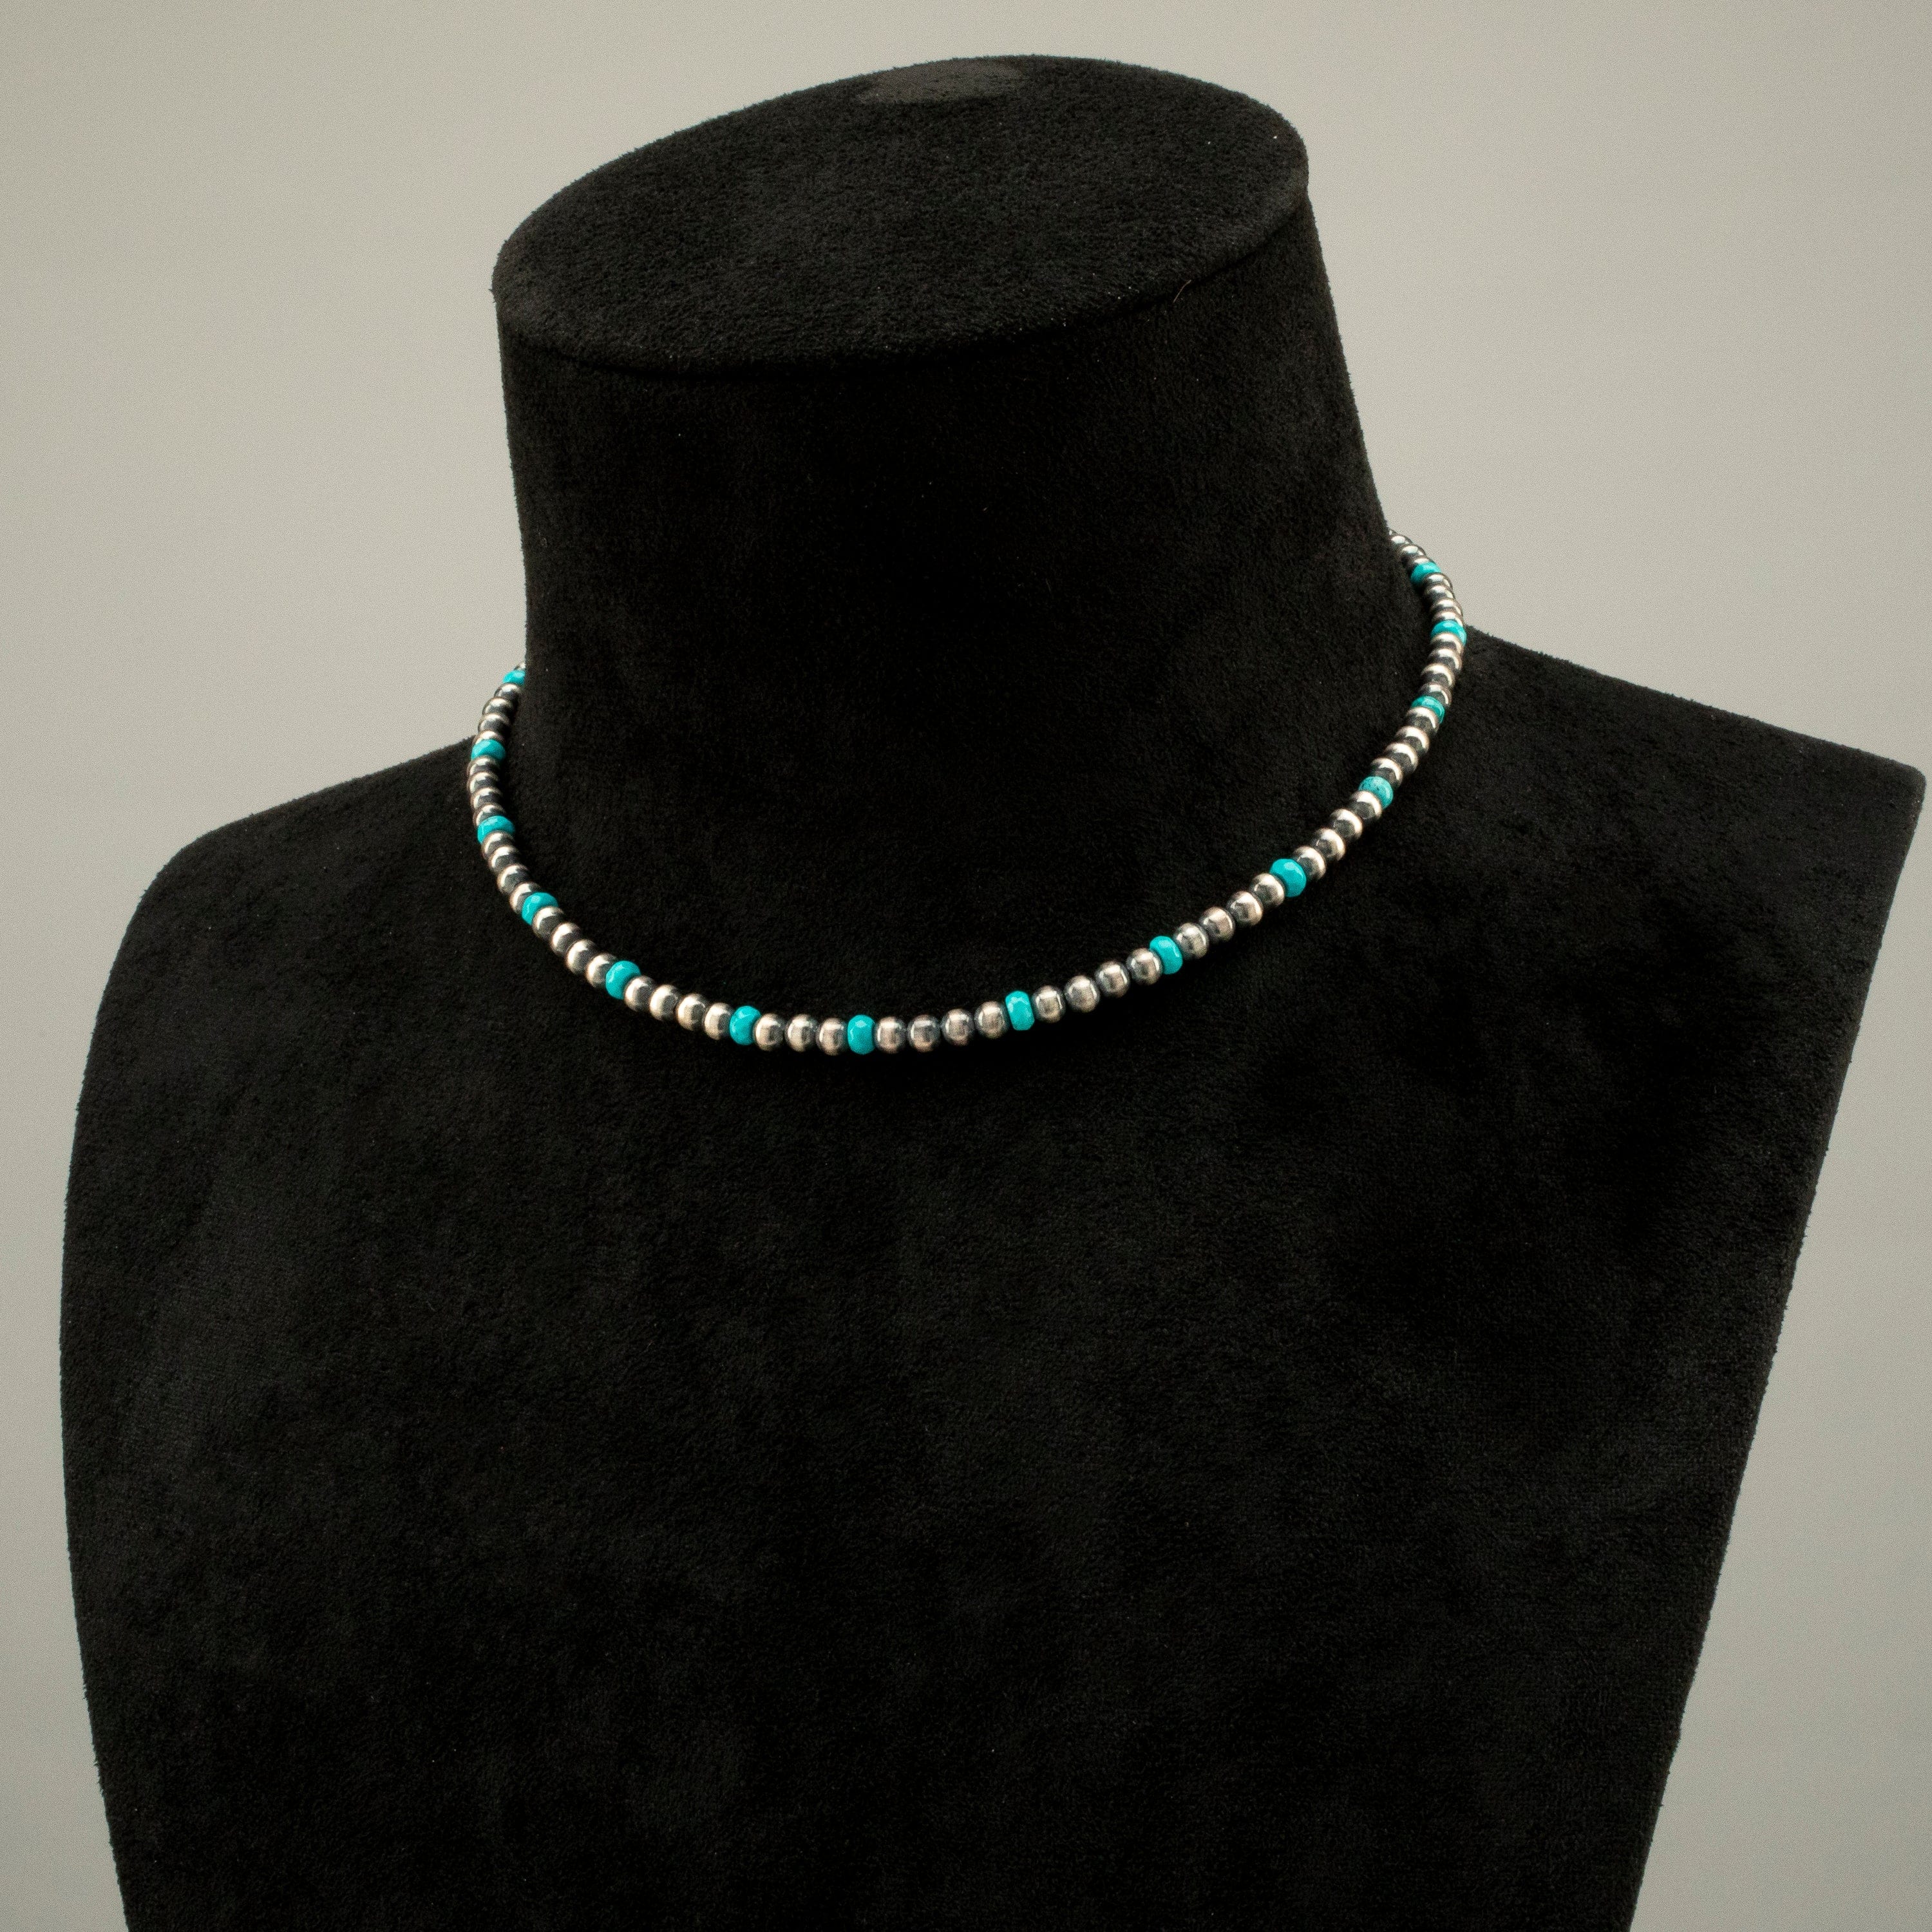 Kalifano Native American Jewelry 16" Single Strand 4mm Navajo Pearl & Turquoise USA Native American Made 925 Sterling Silver Necklace NAN450.012